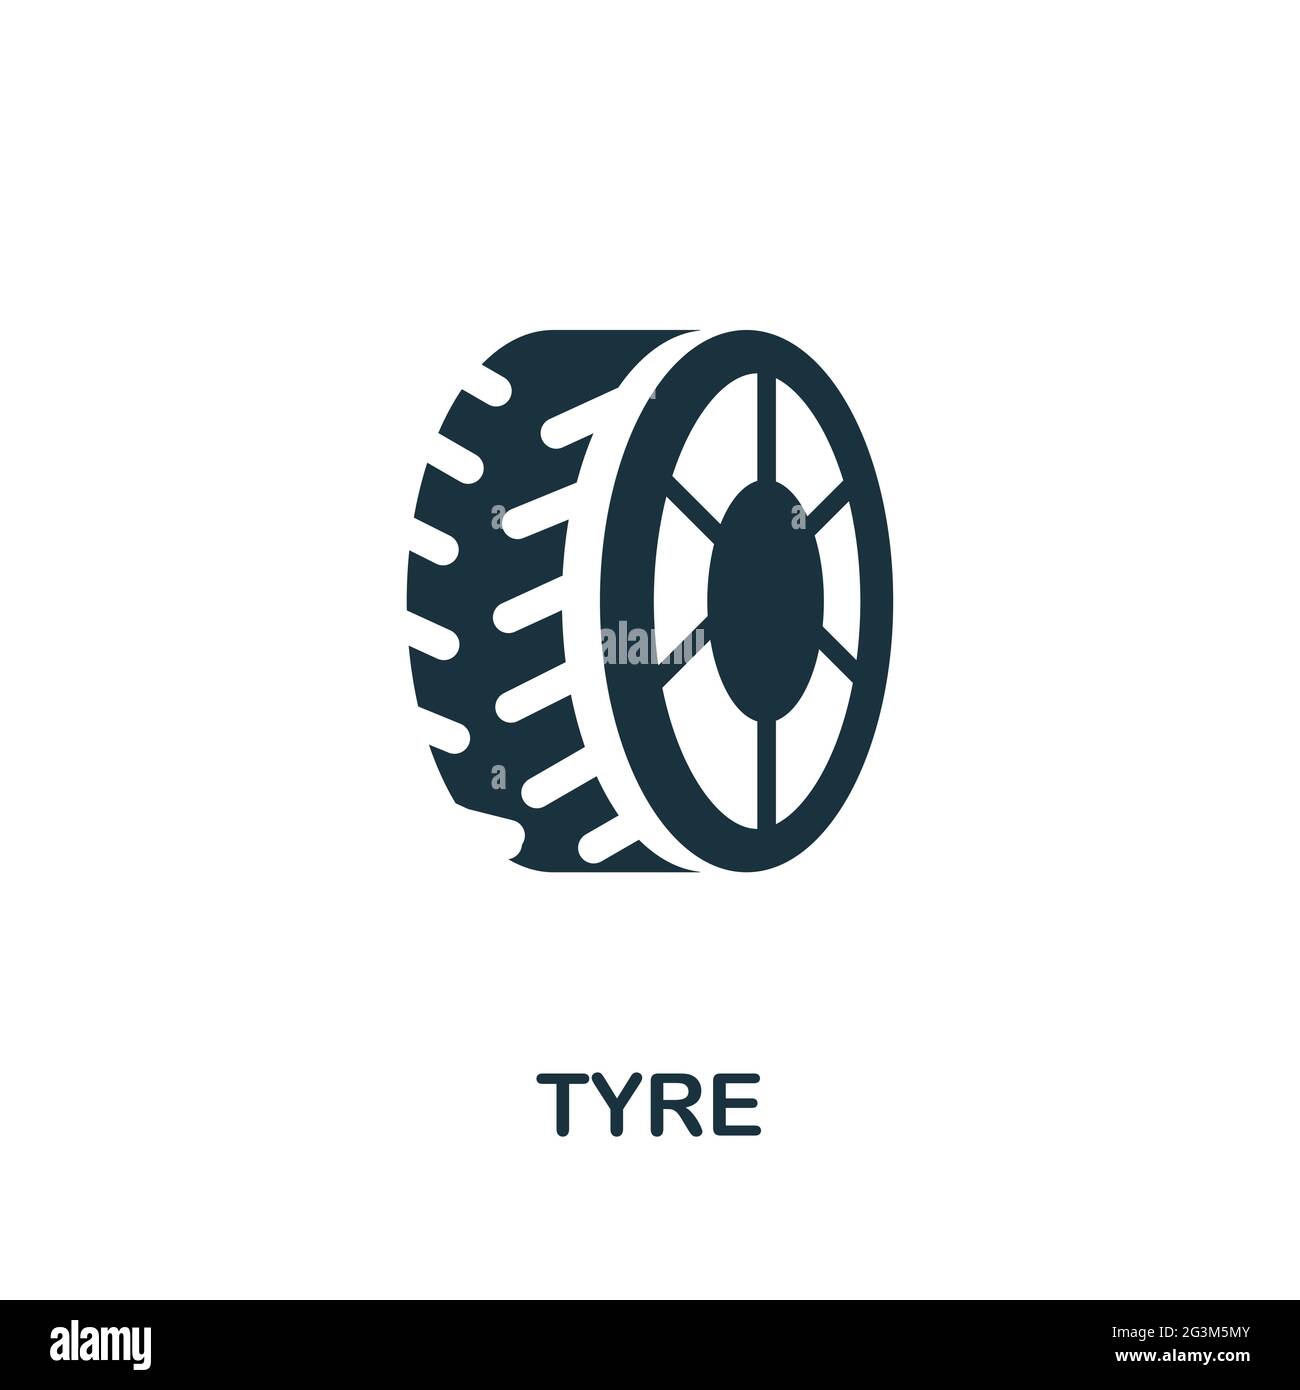 Tyre flat icon. Colored filled simple Tyre icon for templates, web design and infographics Stock Vector